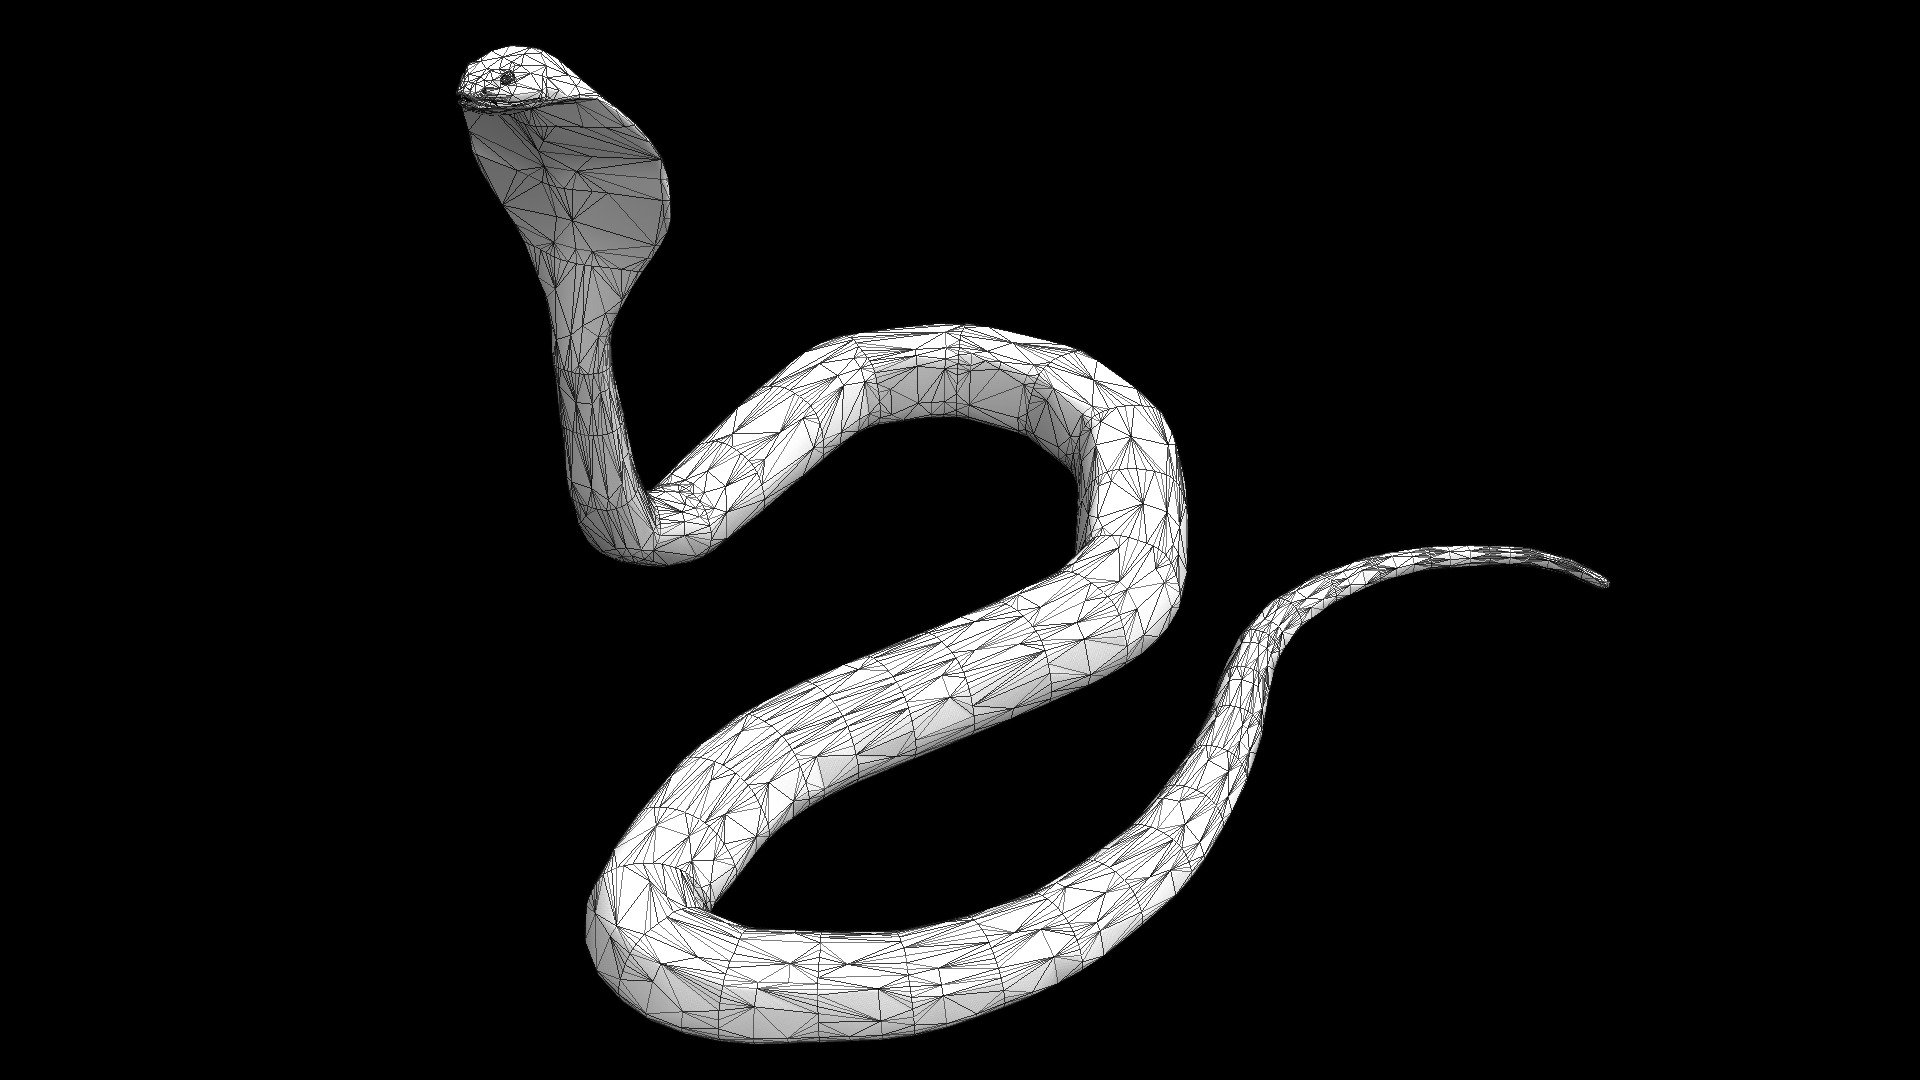 My simple Art - 3d snake... By pen nd pencil on paper... | Facebook